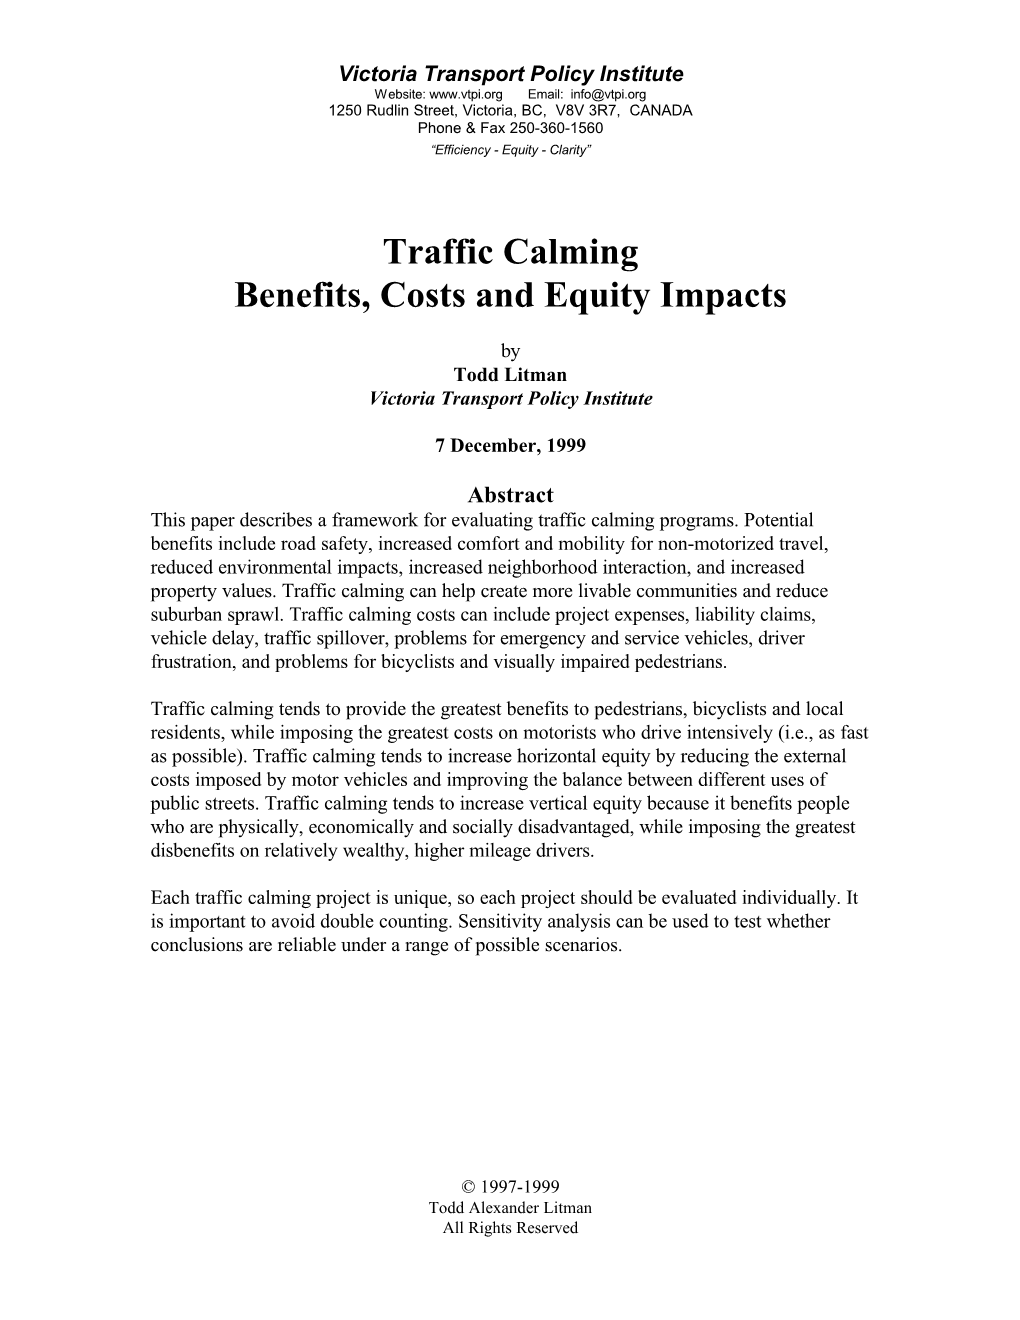 Traffic Calming Benefits, Costs and Equity Impacts